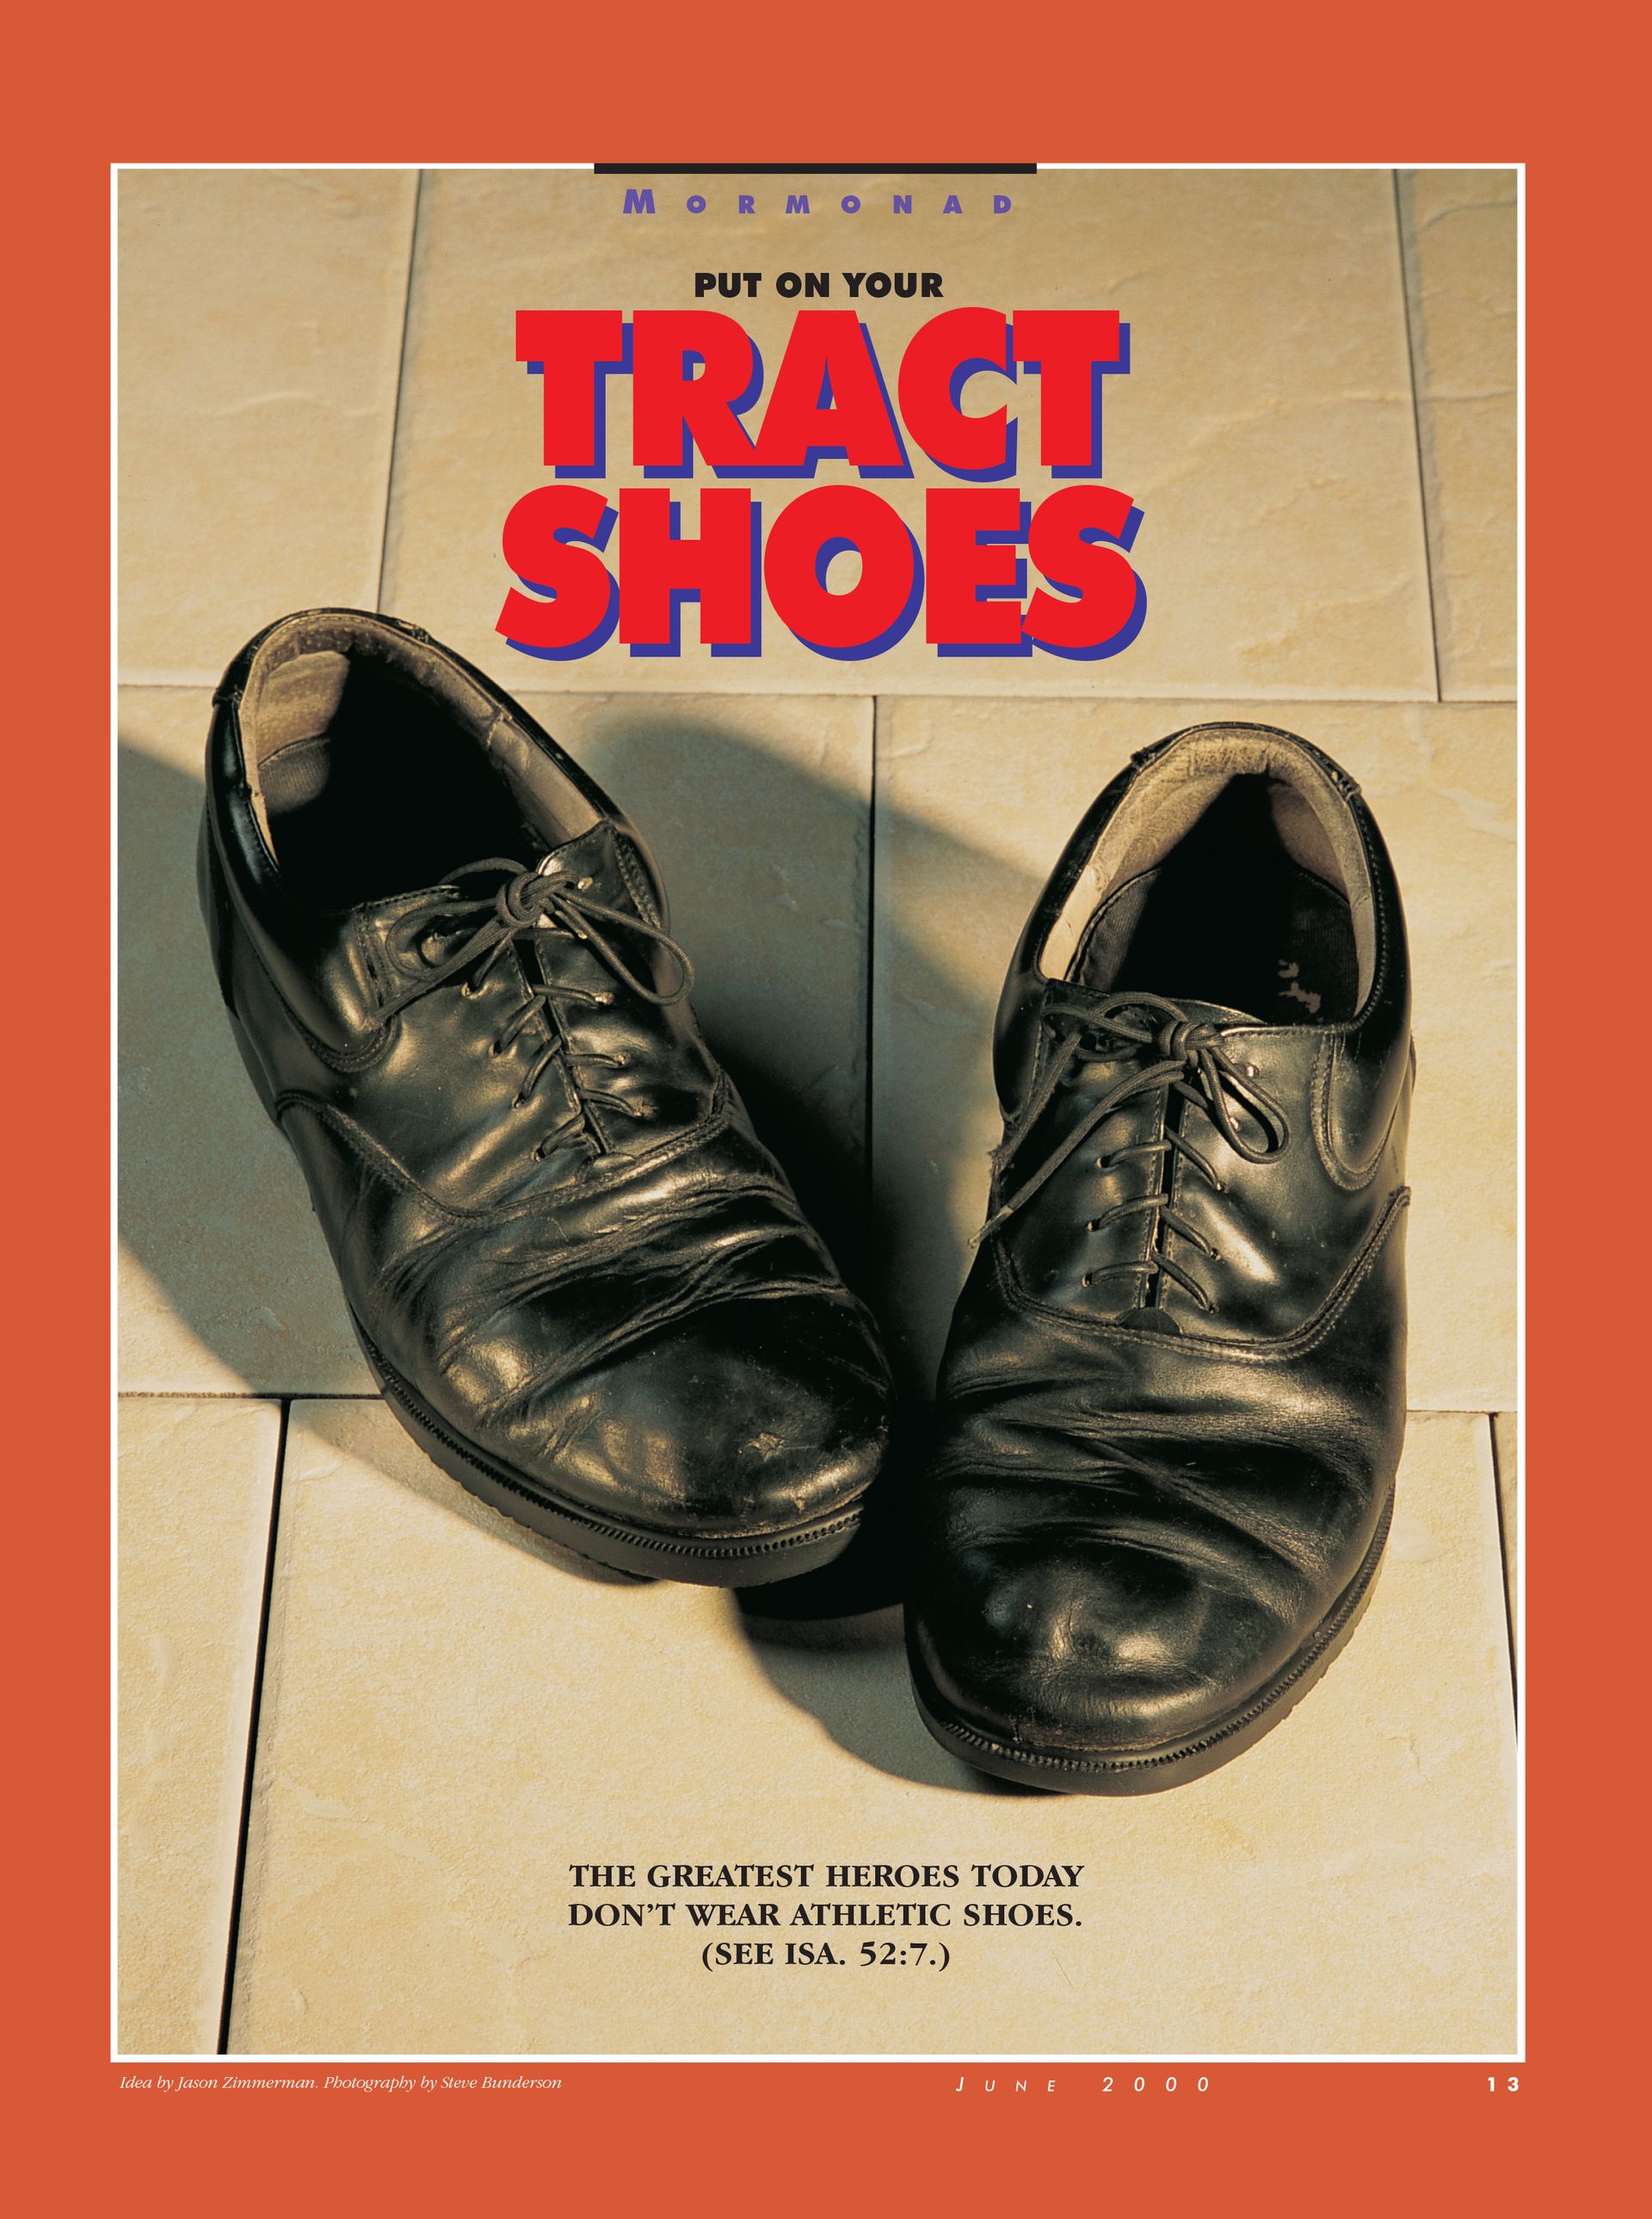 Put On Your Tract Shoes. The greatest heroes today Don't wear athletic shoes. (See Isa. 52:7.) June 2000 © undefined ipCode 1.